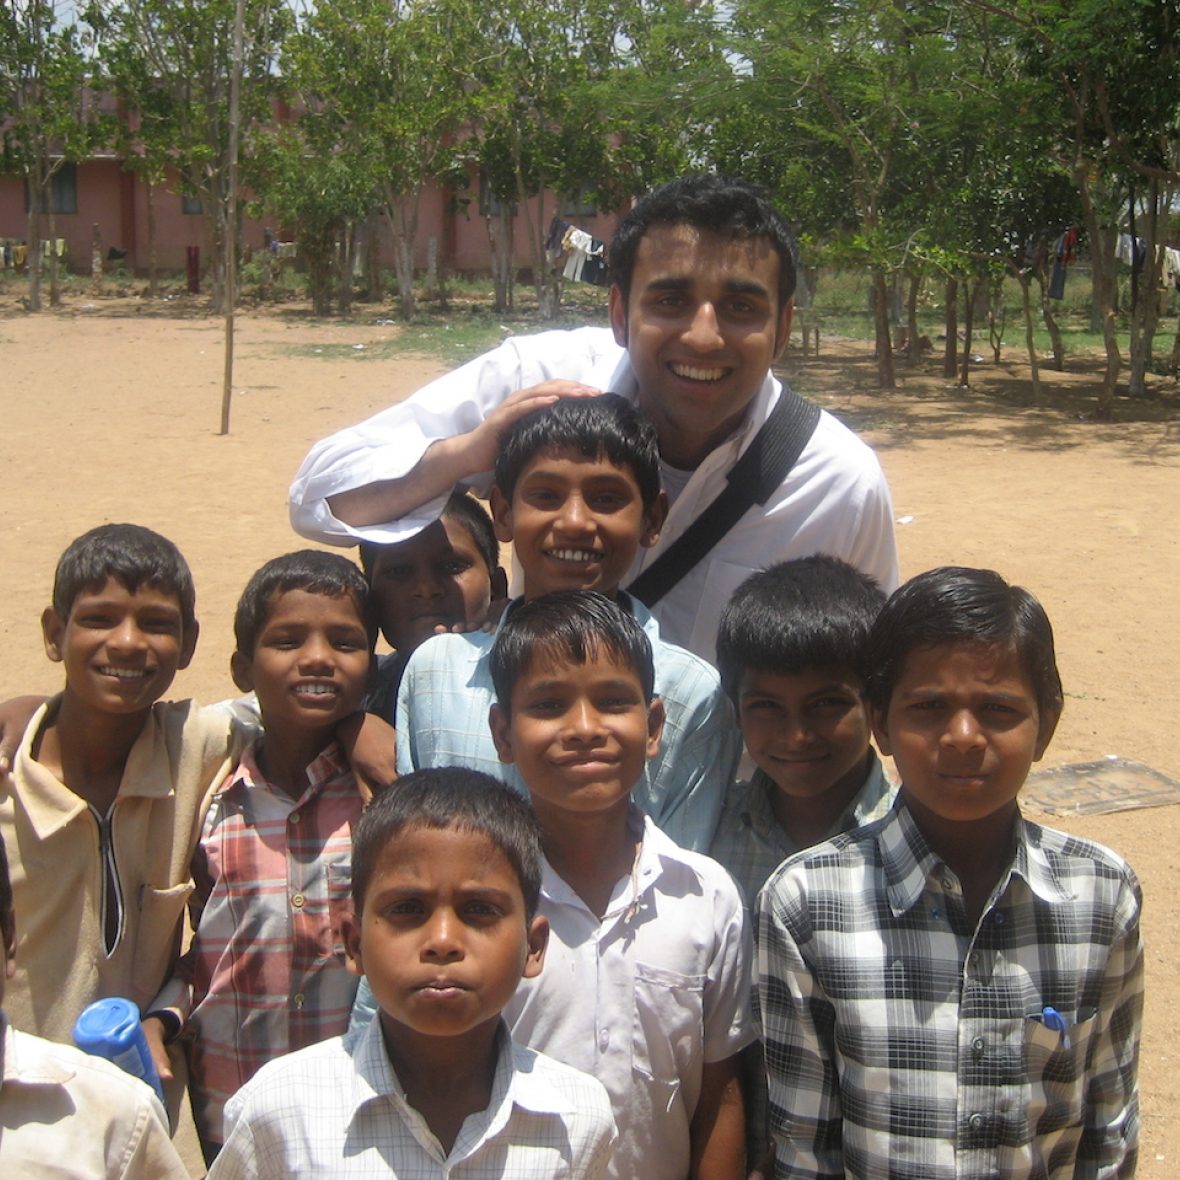 Reggie Thomas, wearing a white button-down with a camera strap across his chest, smiles at the camera from behind a crowd of smiling children, beige earth and green trees in the background